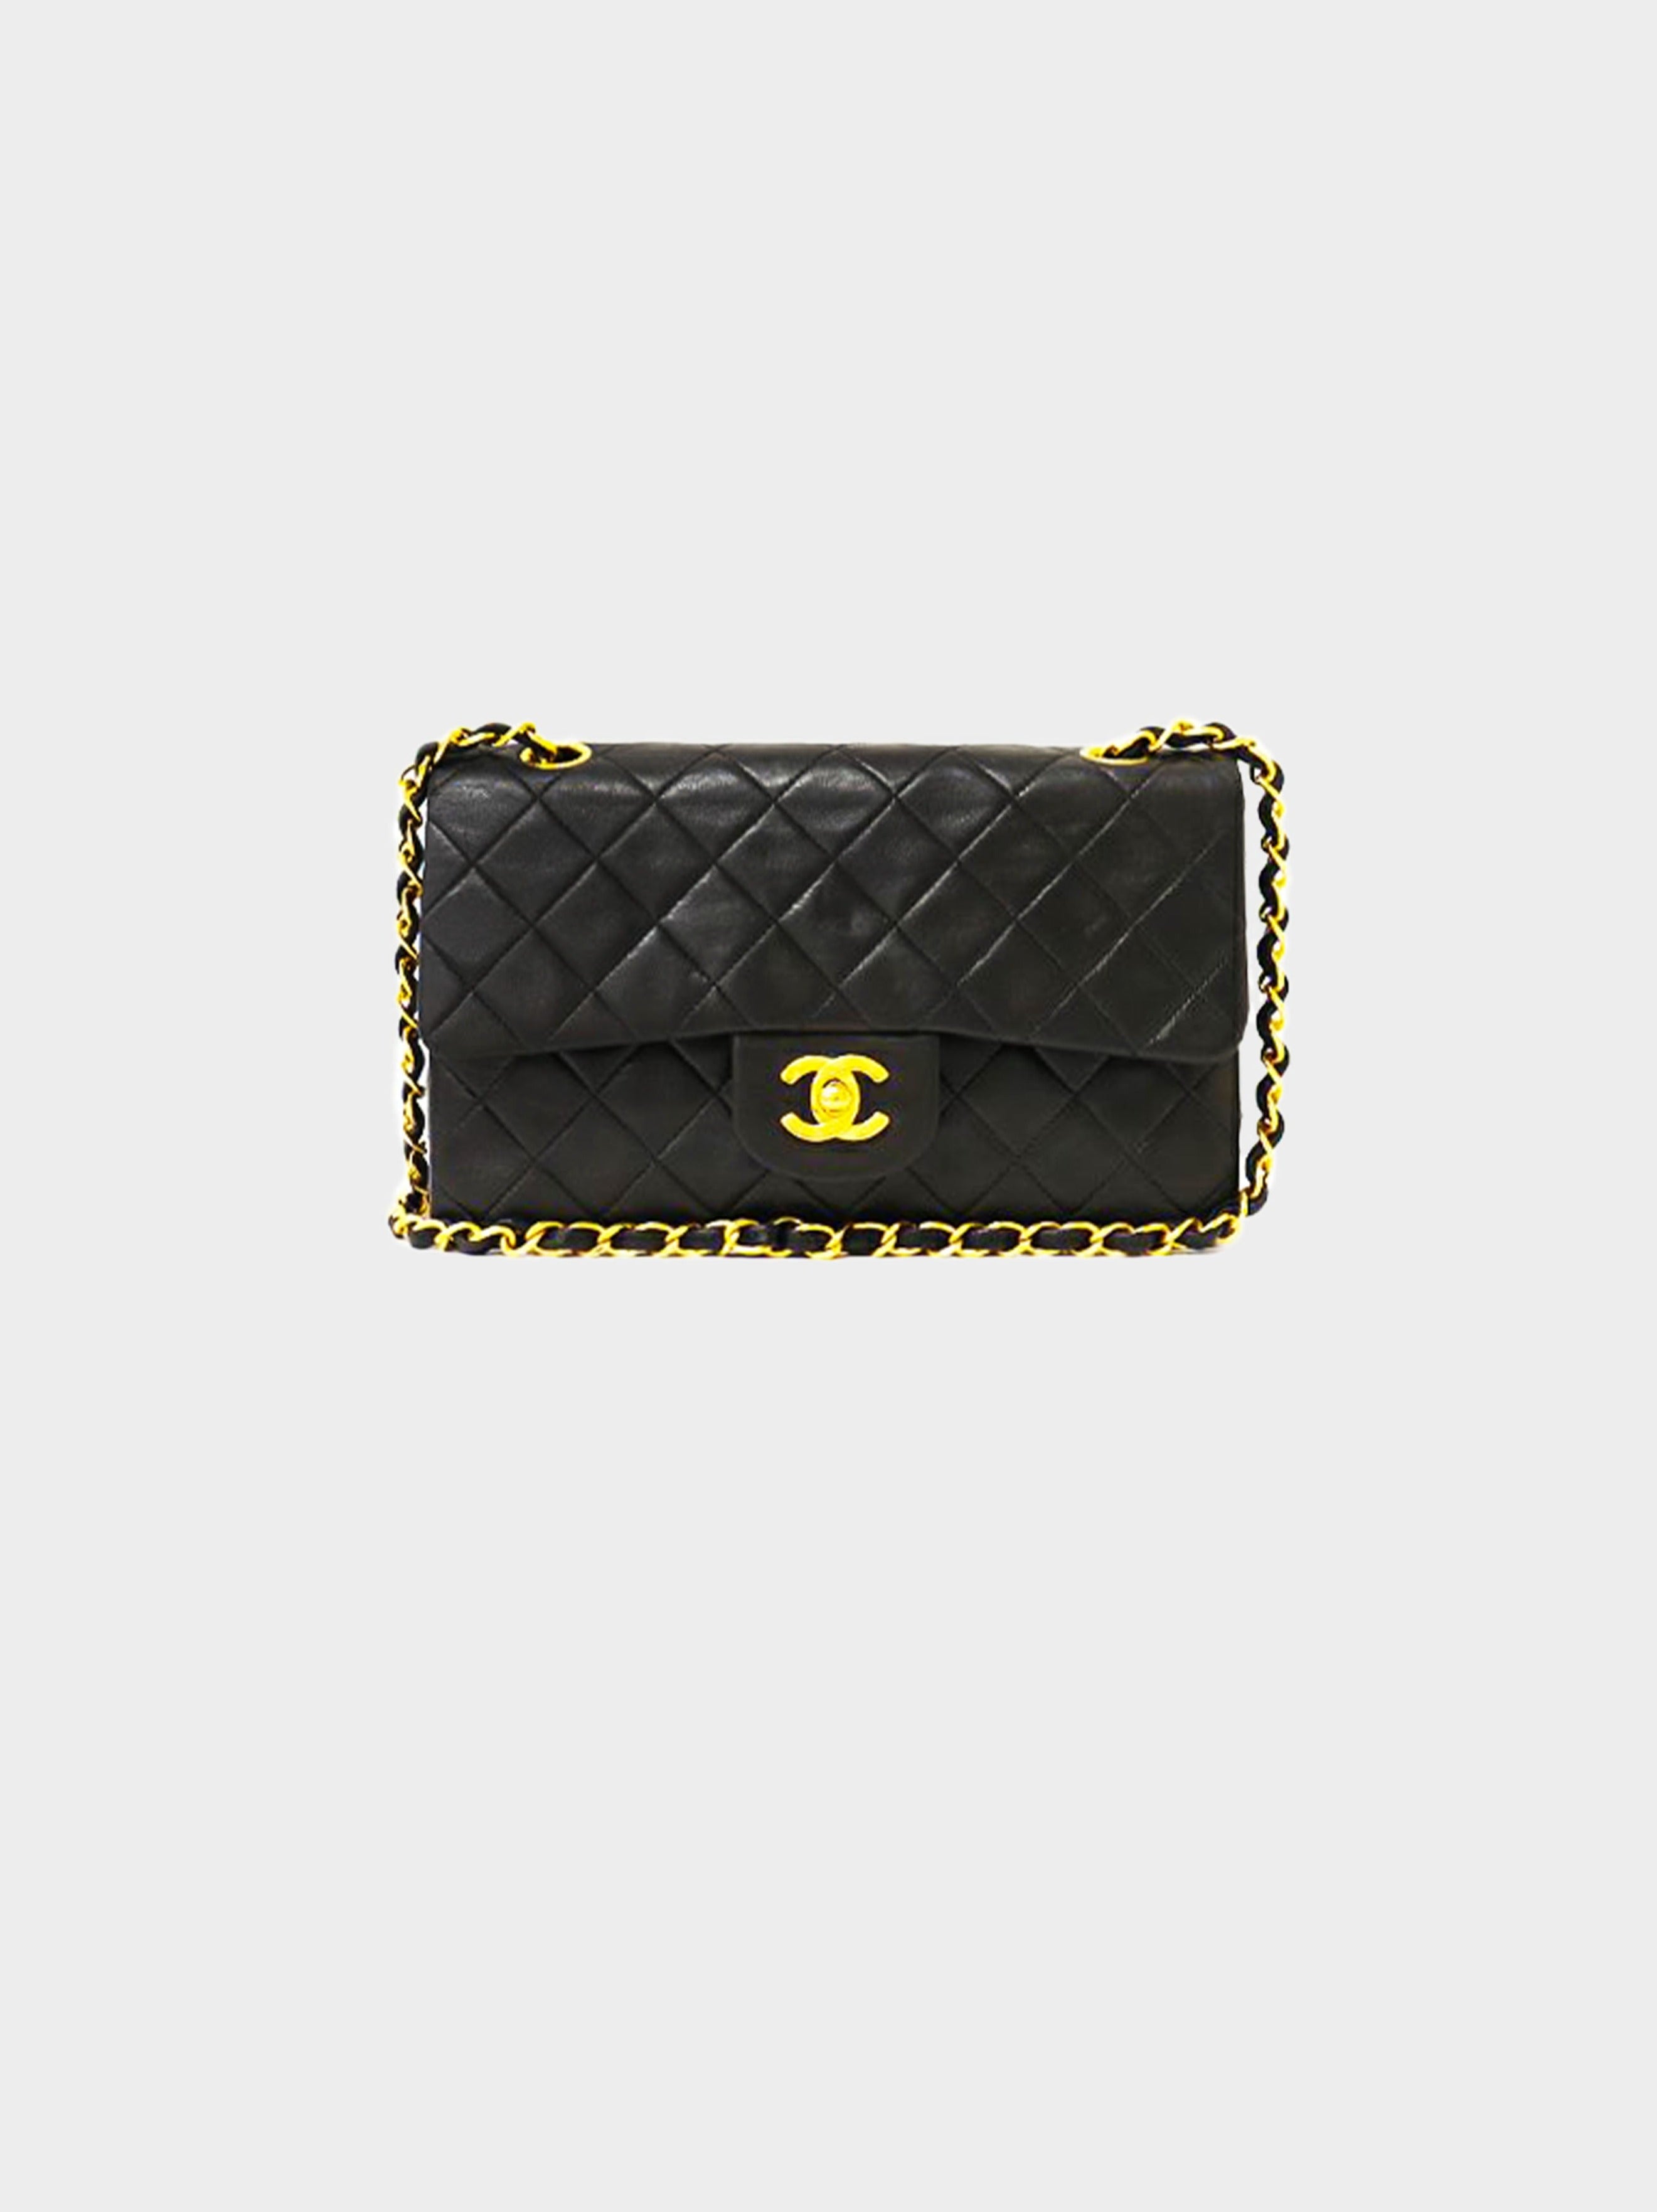 CHANEL - 1980s Small Classic Black Quilted Leather Flap Shoulder Bag /  Crossbody